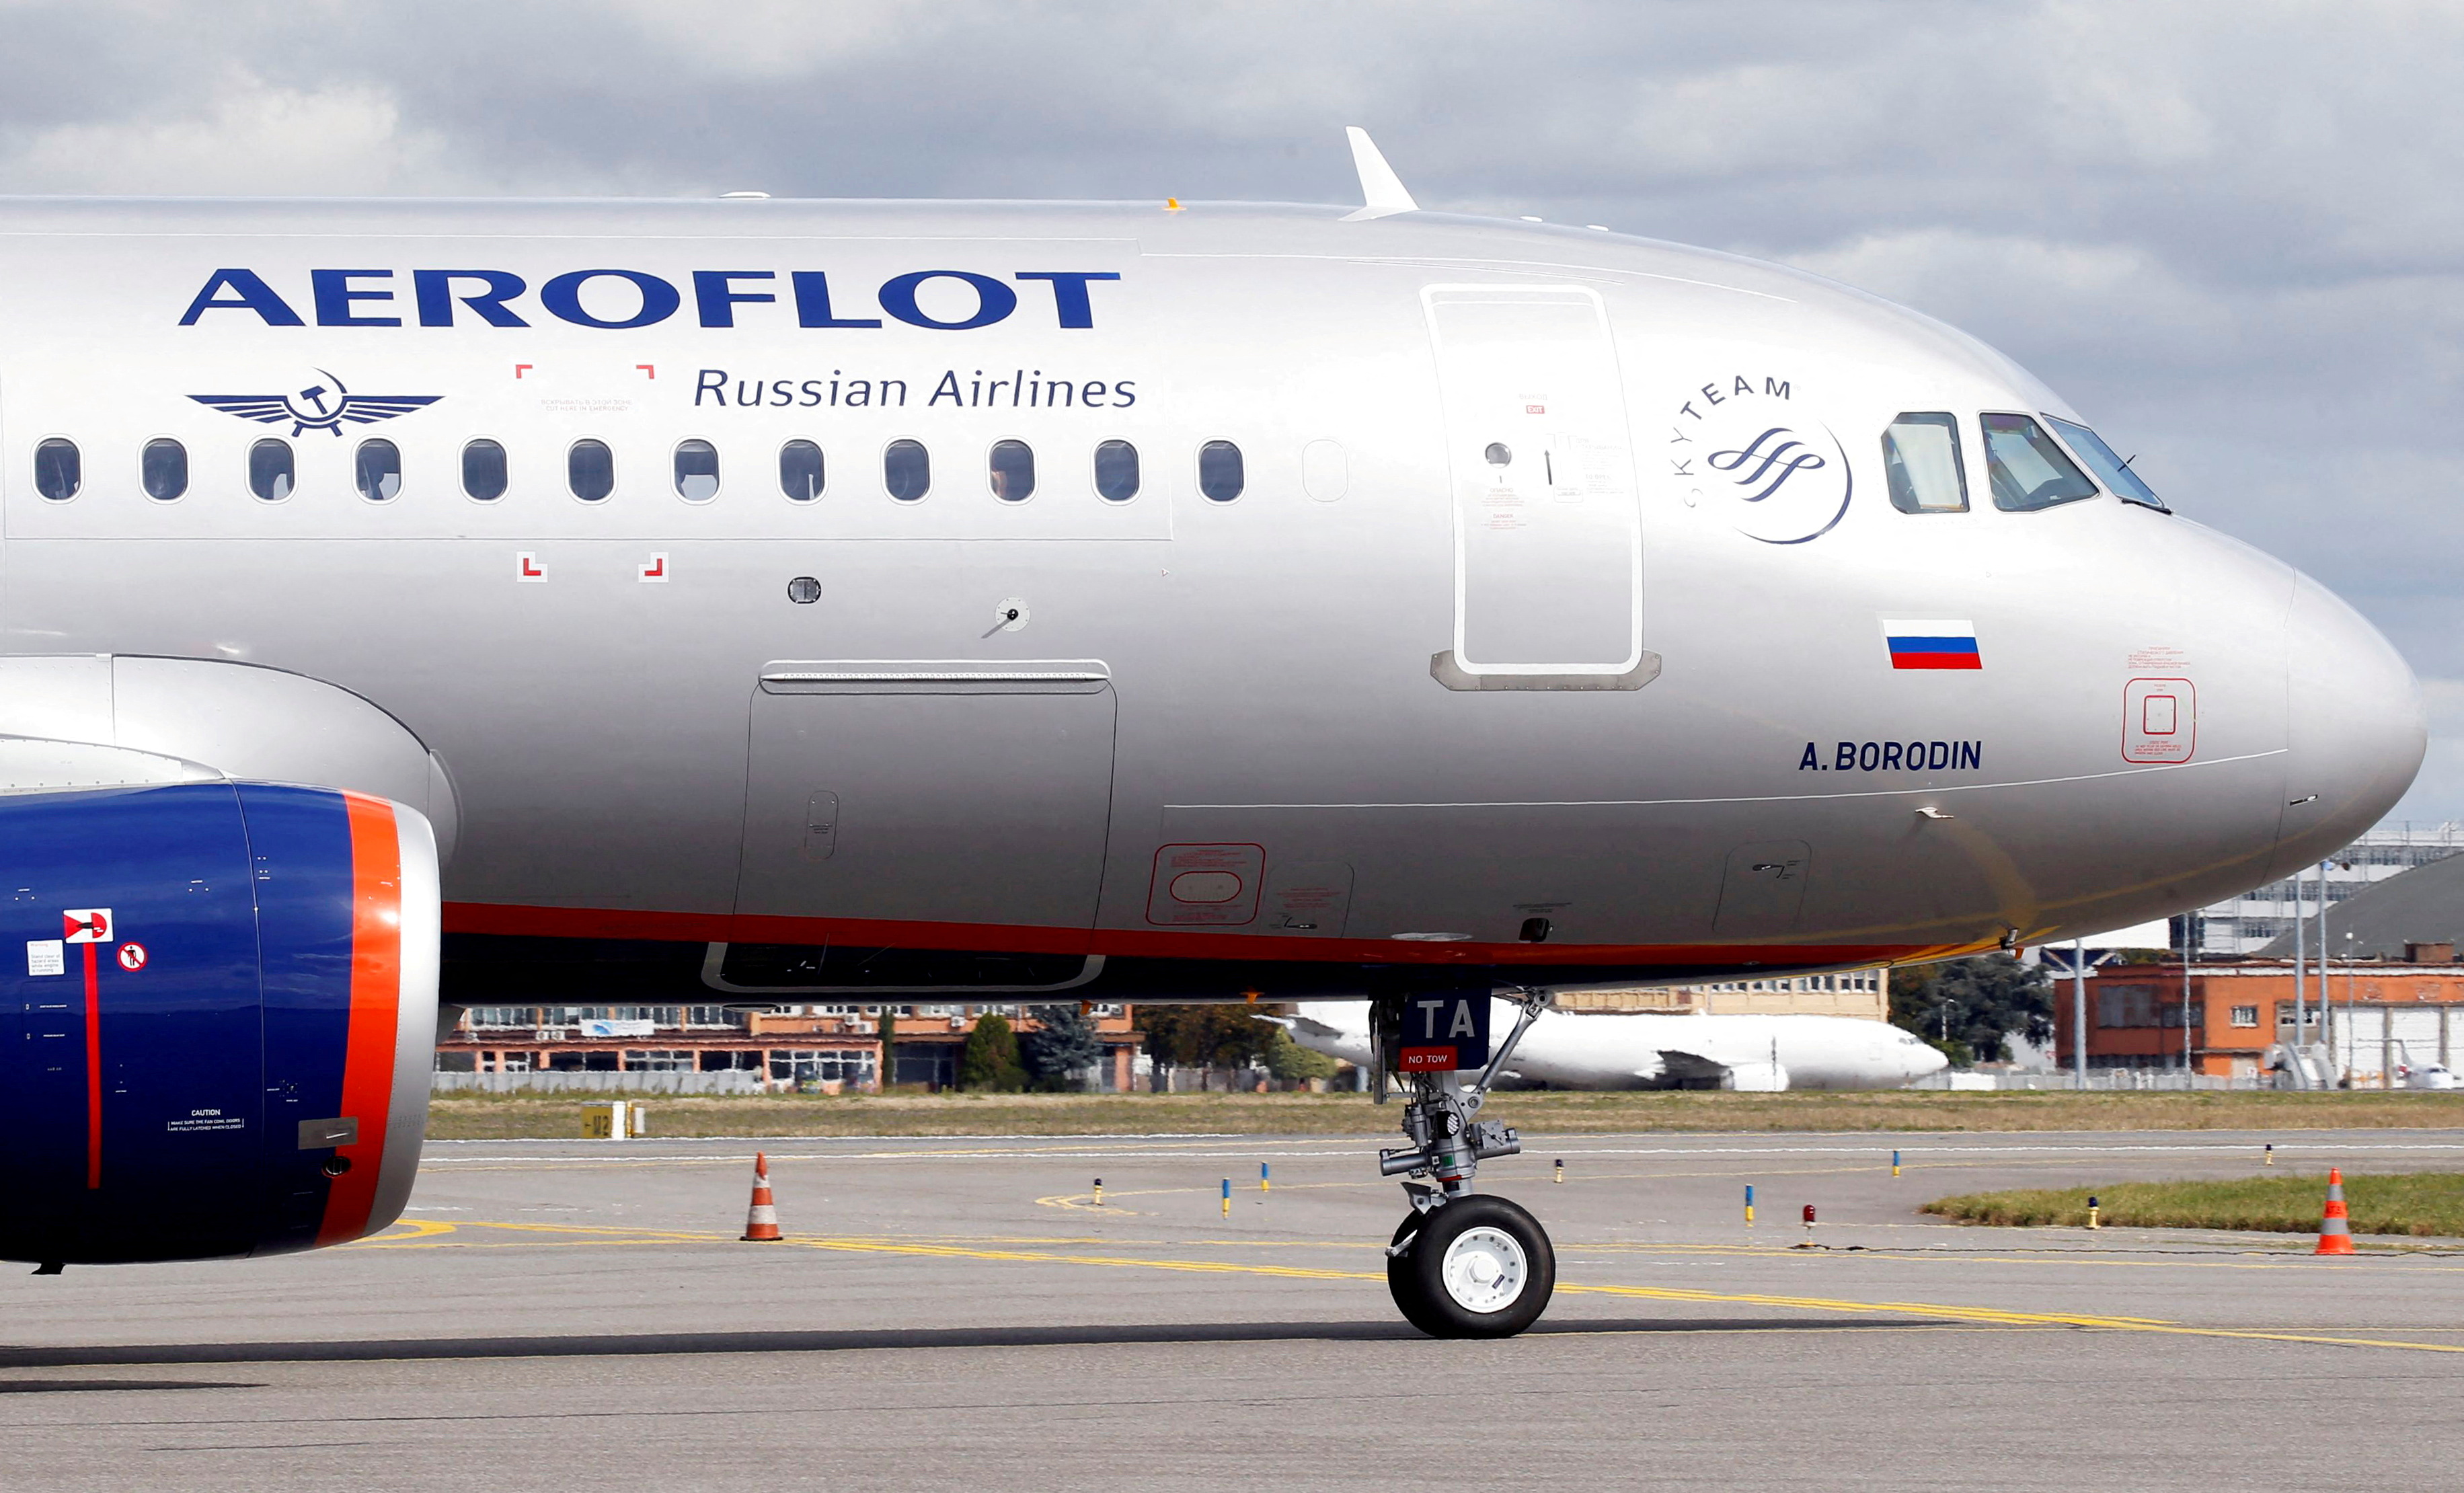 The logo of Russia's flagship airline Aeroflot is seen on an Airbus A320 in Colomiers near Toulouse, France